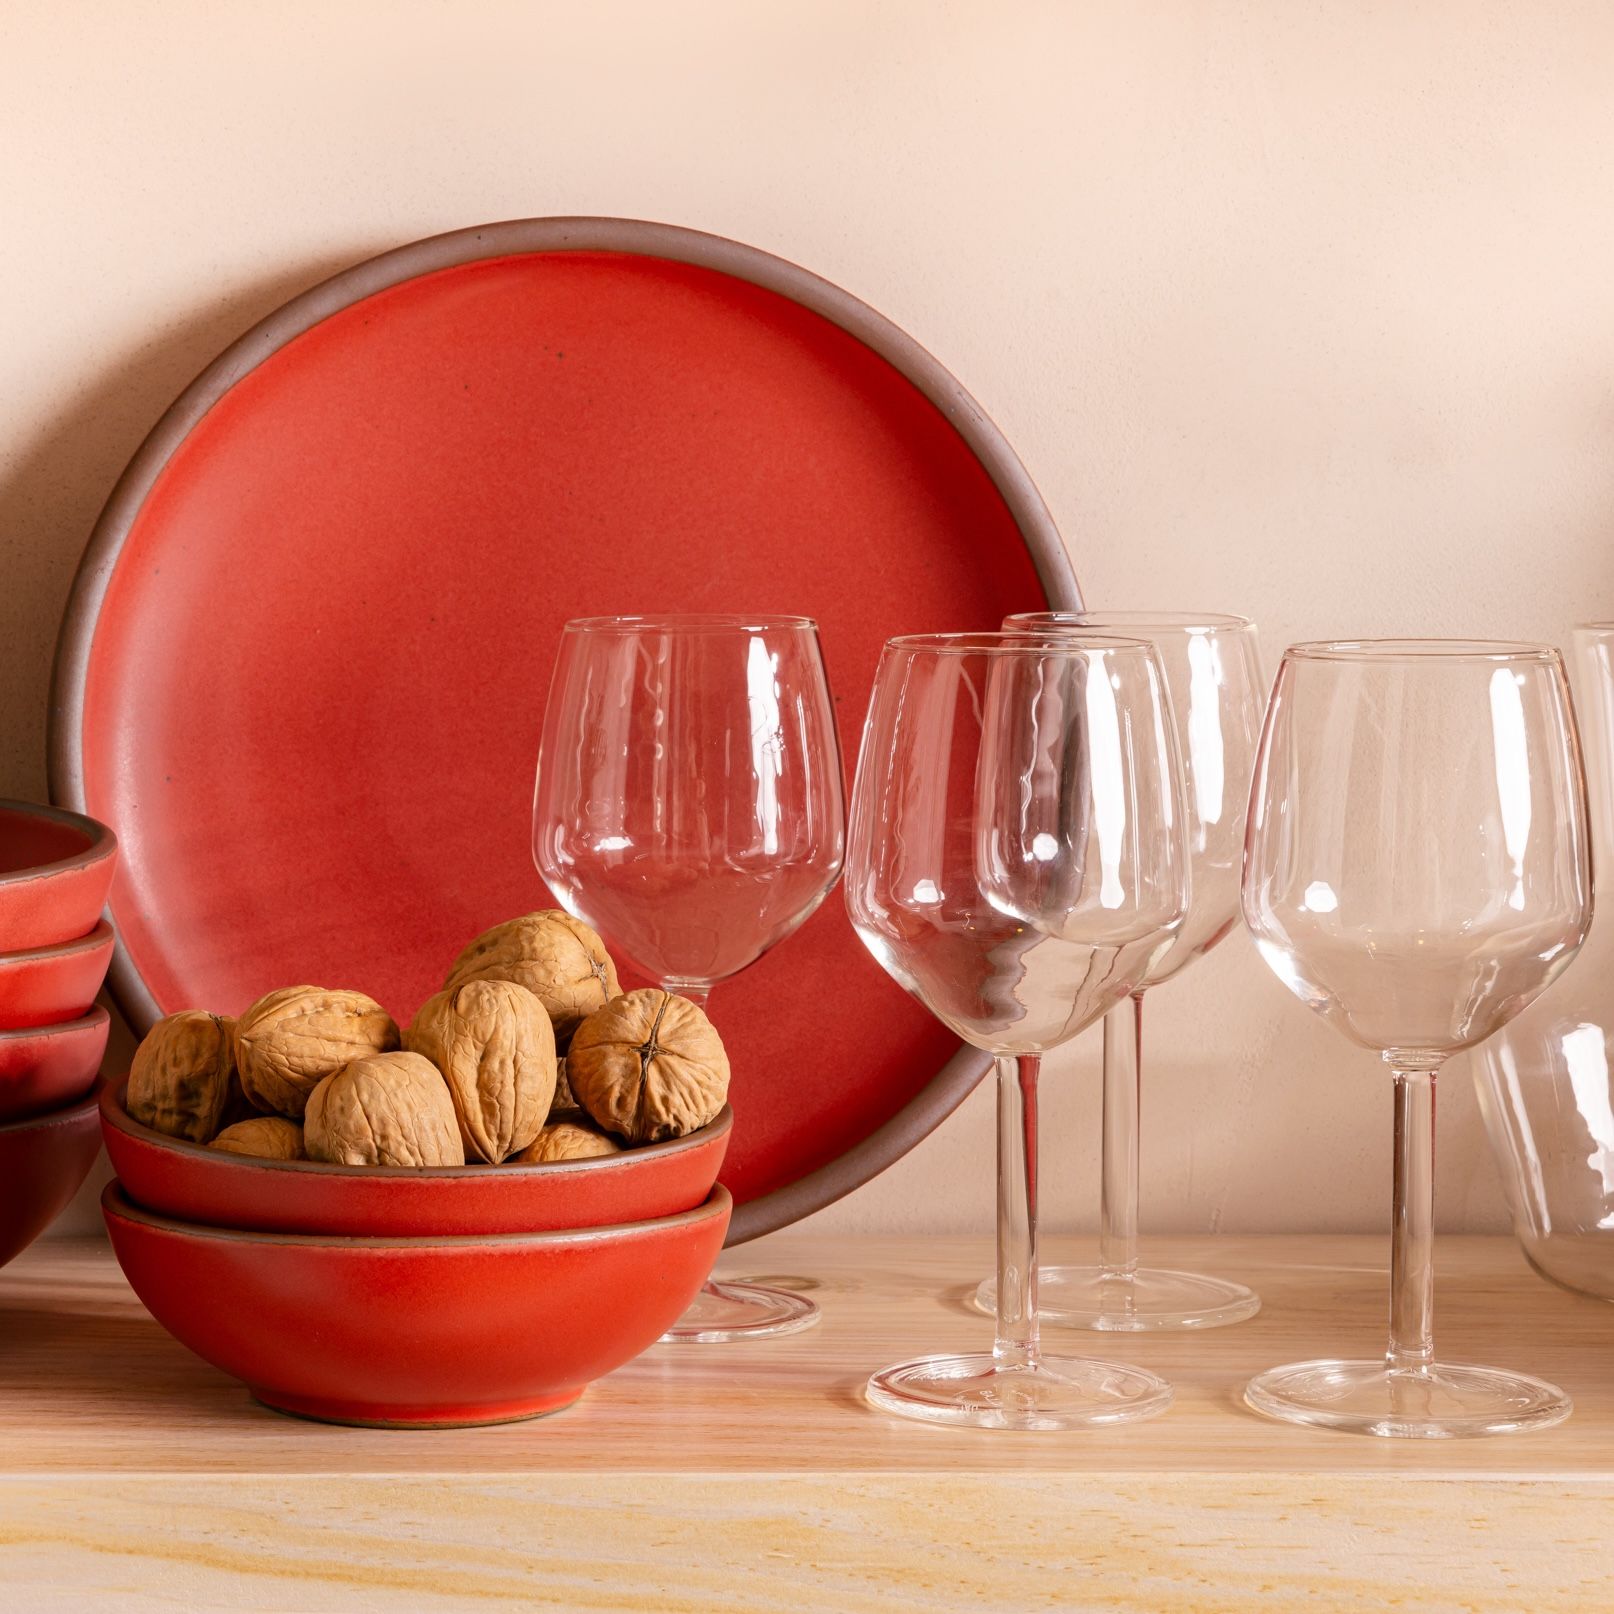 On a shelf is several clear simple wine glasses, a propped up red plate, and a stack of small red bowls with walnuts inside